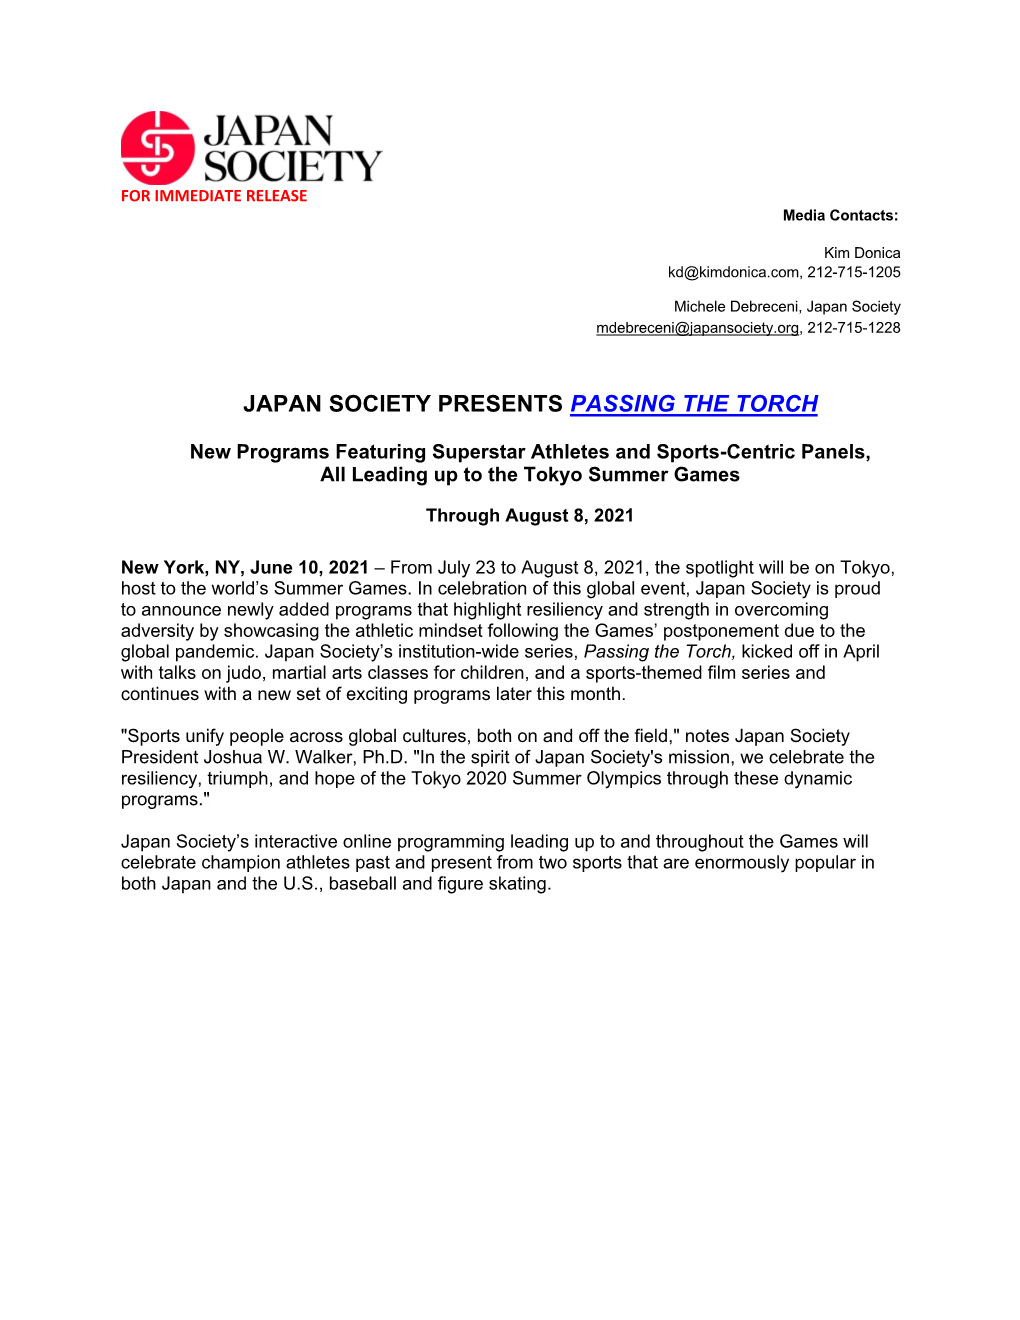 Japan Society Presents Passing the Torch